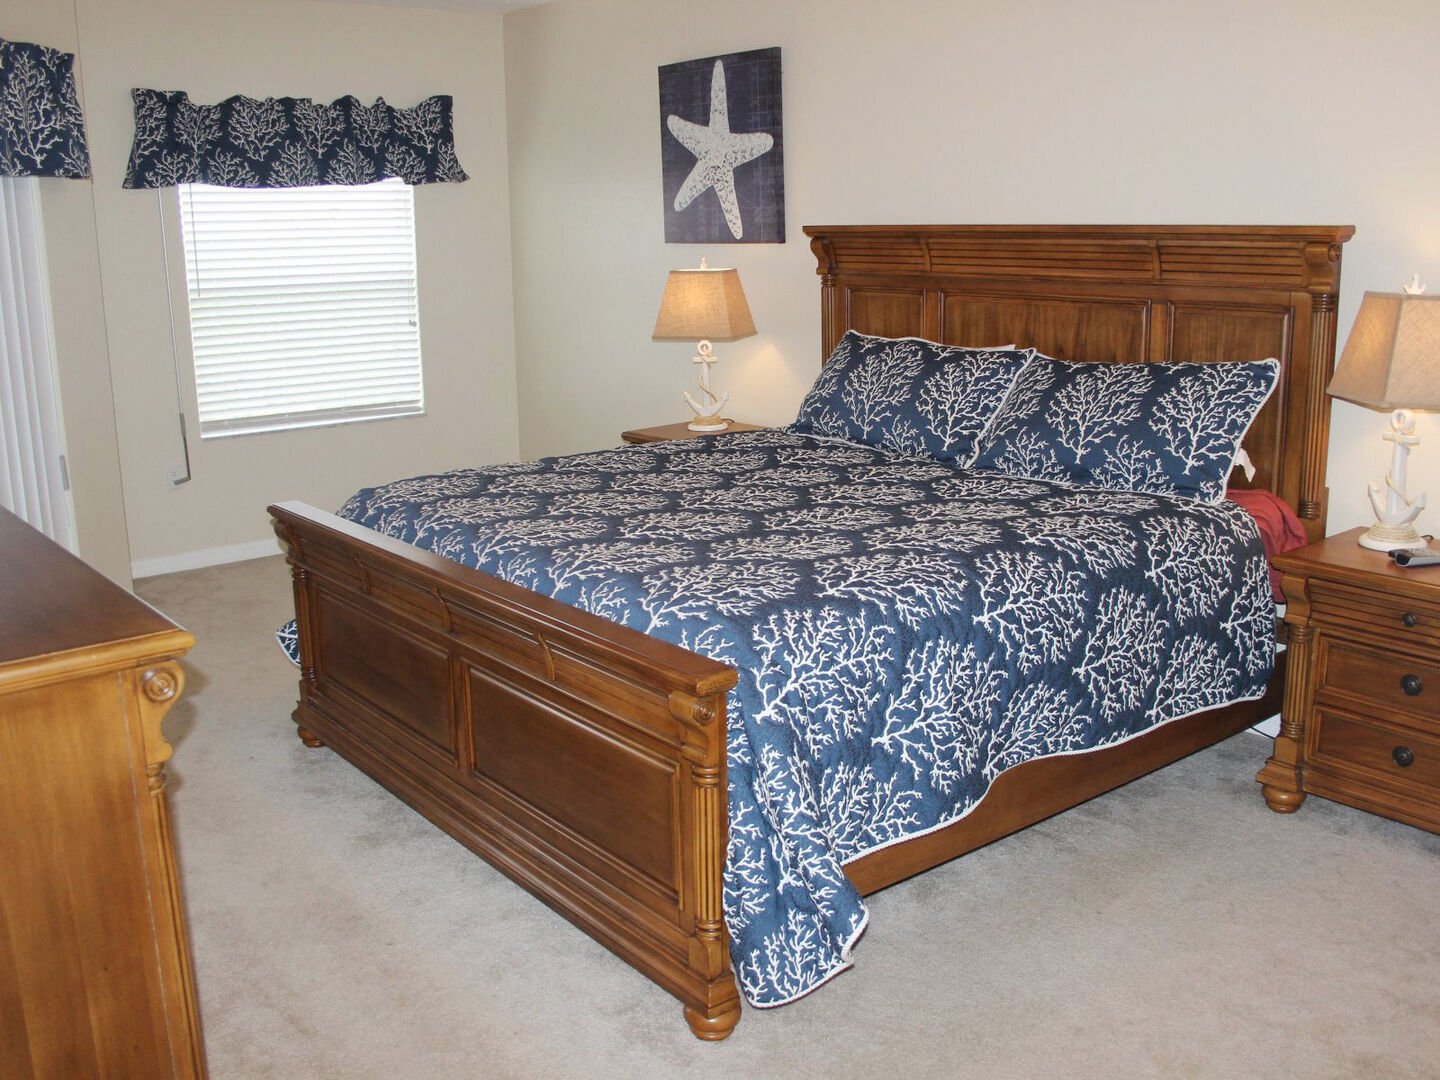 Roomy master bedroom with king size bed and private bath.